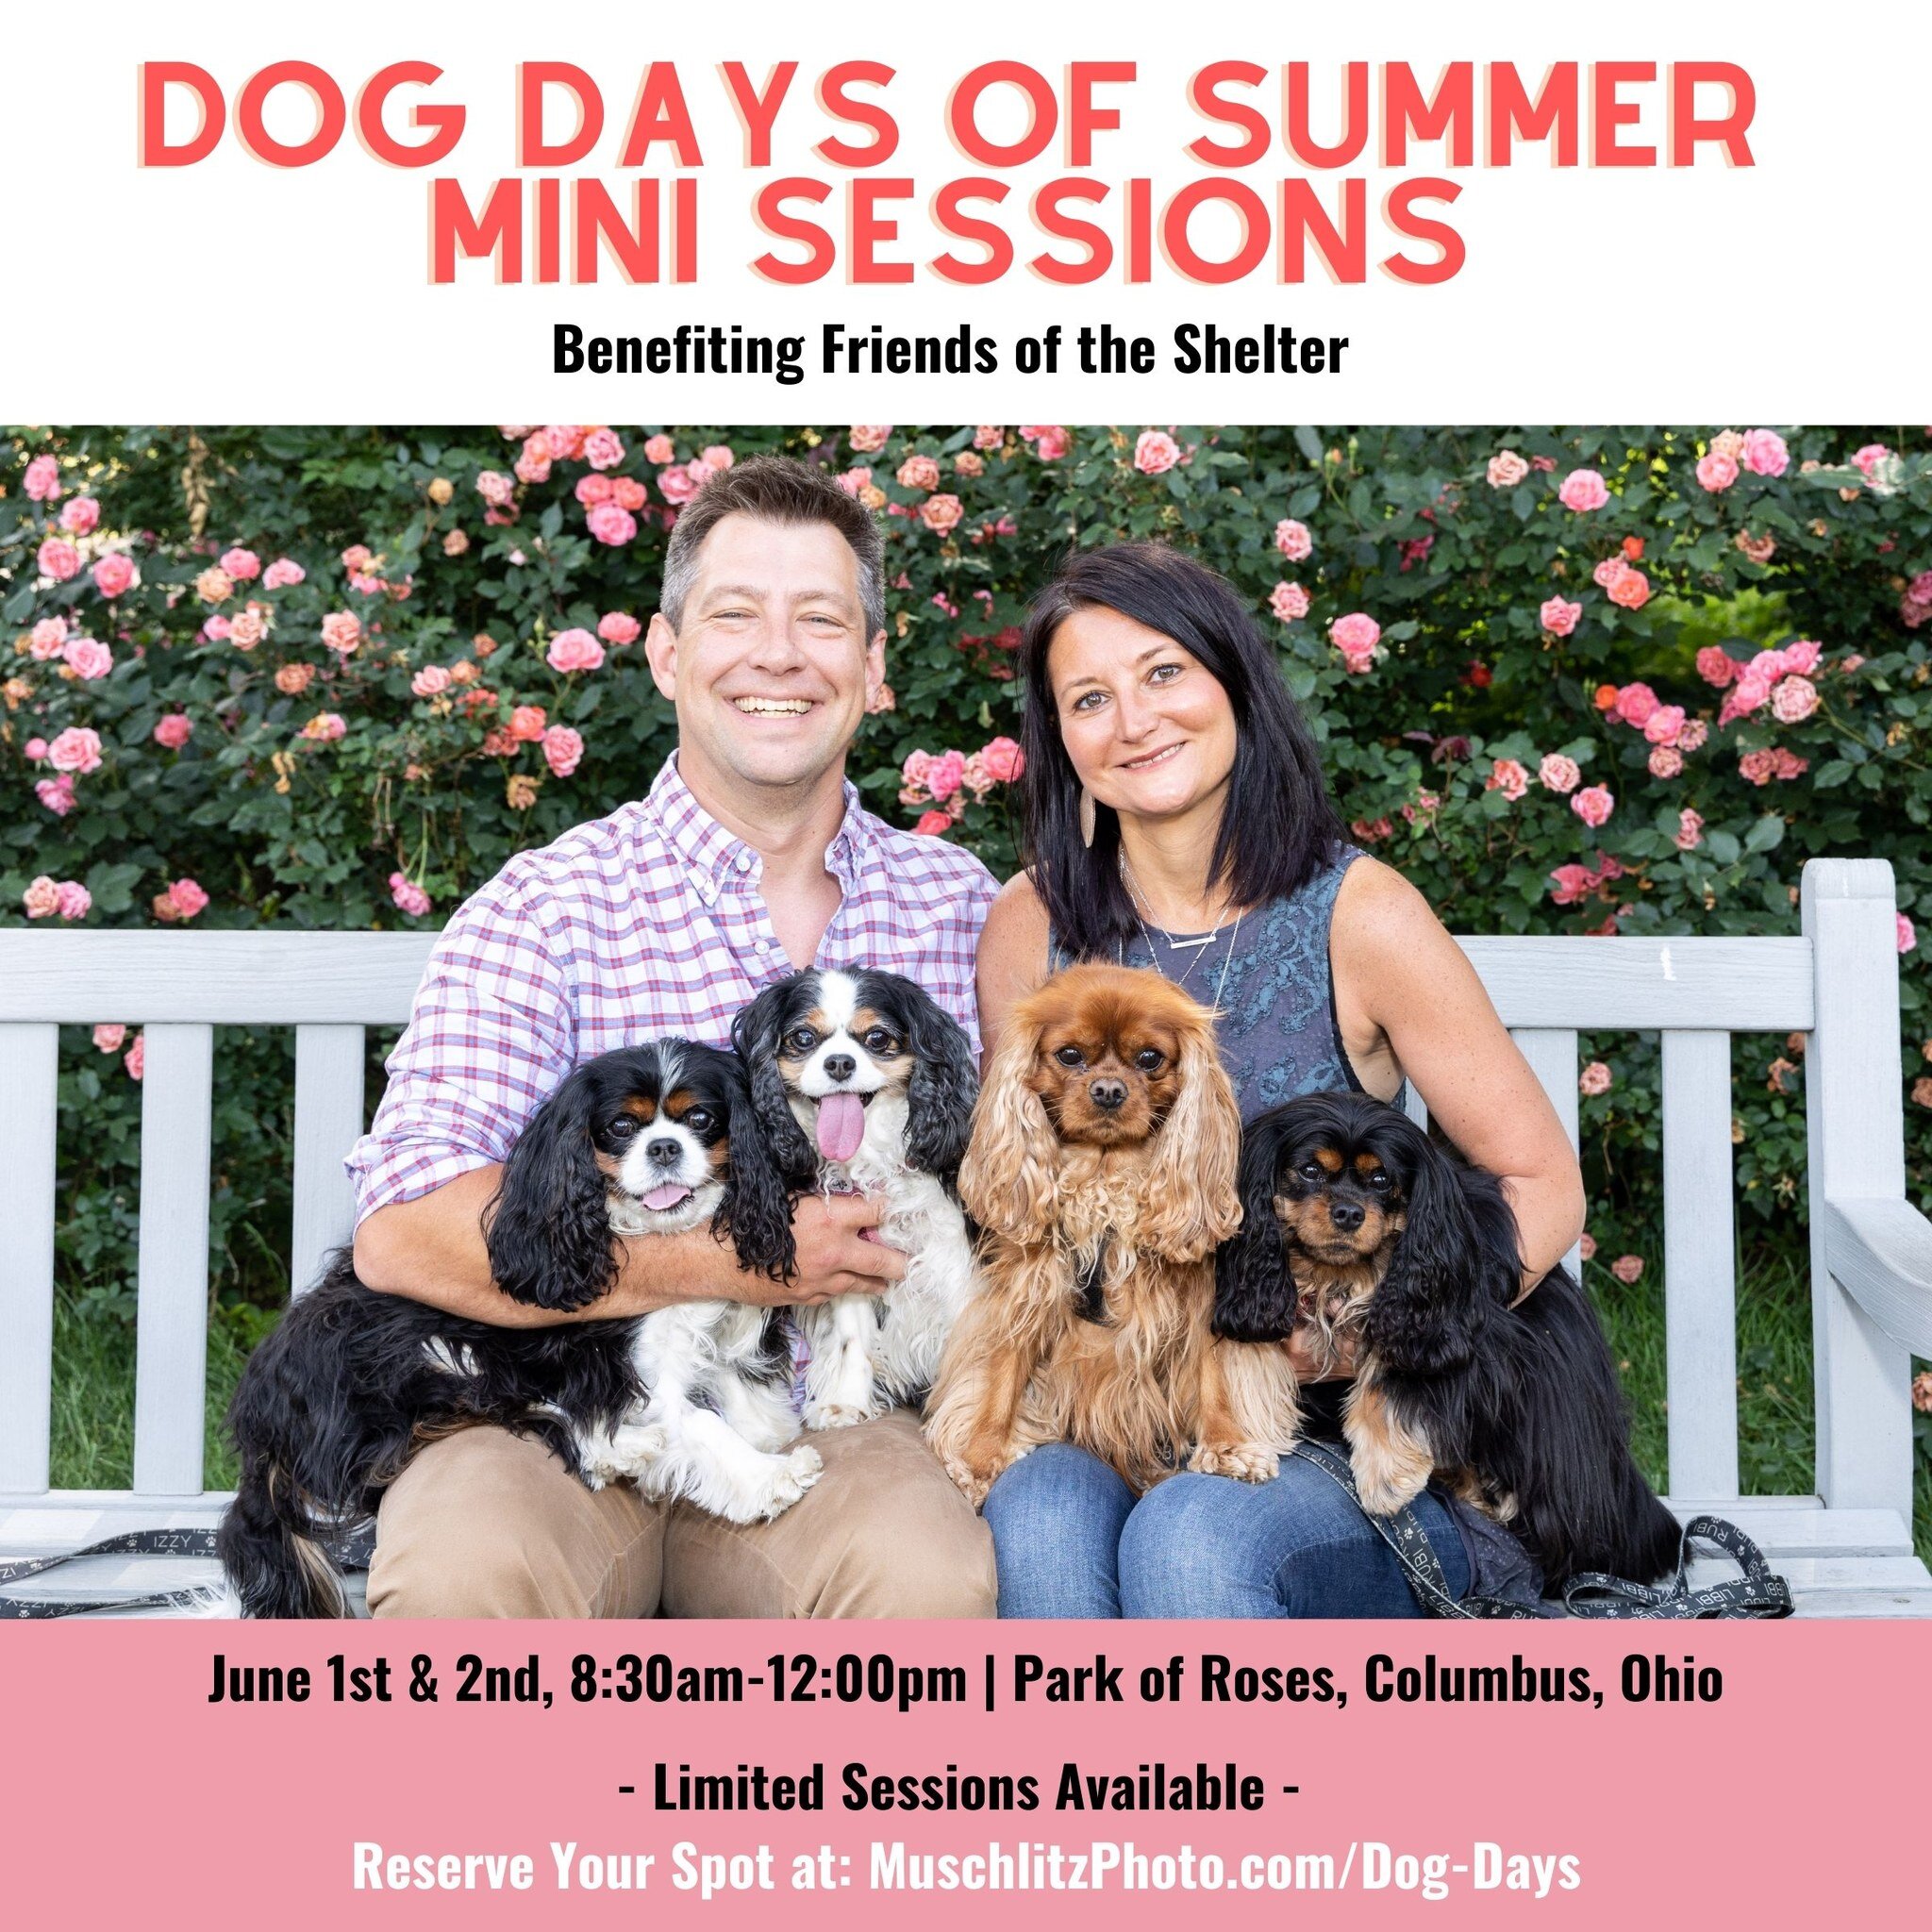 Warmer weather is here and it's almost time for one of our favorite fundraisers! We are so excited to host the 11th Annual Dog Days of Summer (Dog-Friendly) Mini Session Fundraiser to benefit the local dog rescue, Friends of the Shelter!

$50 from ev